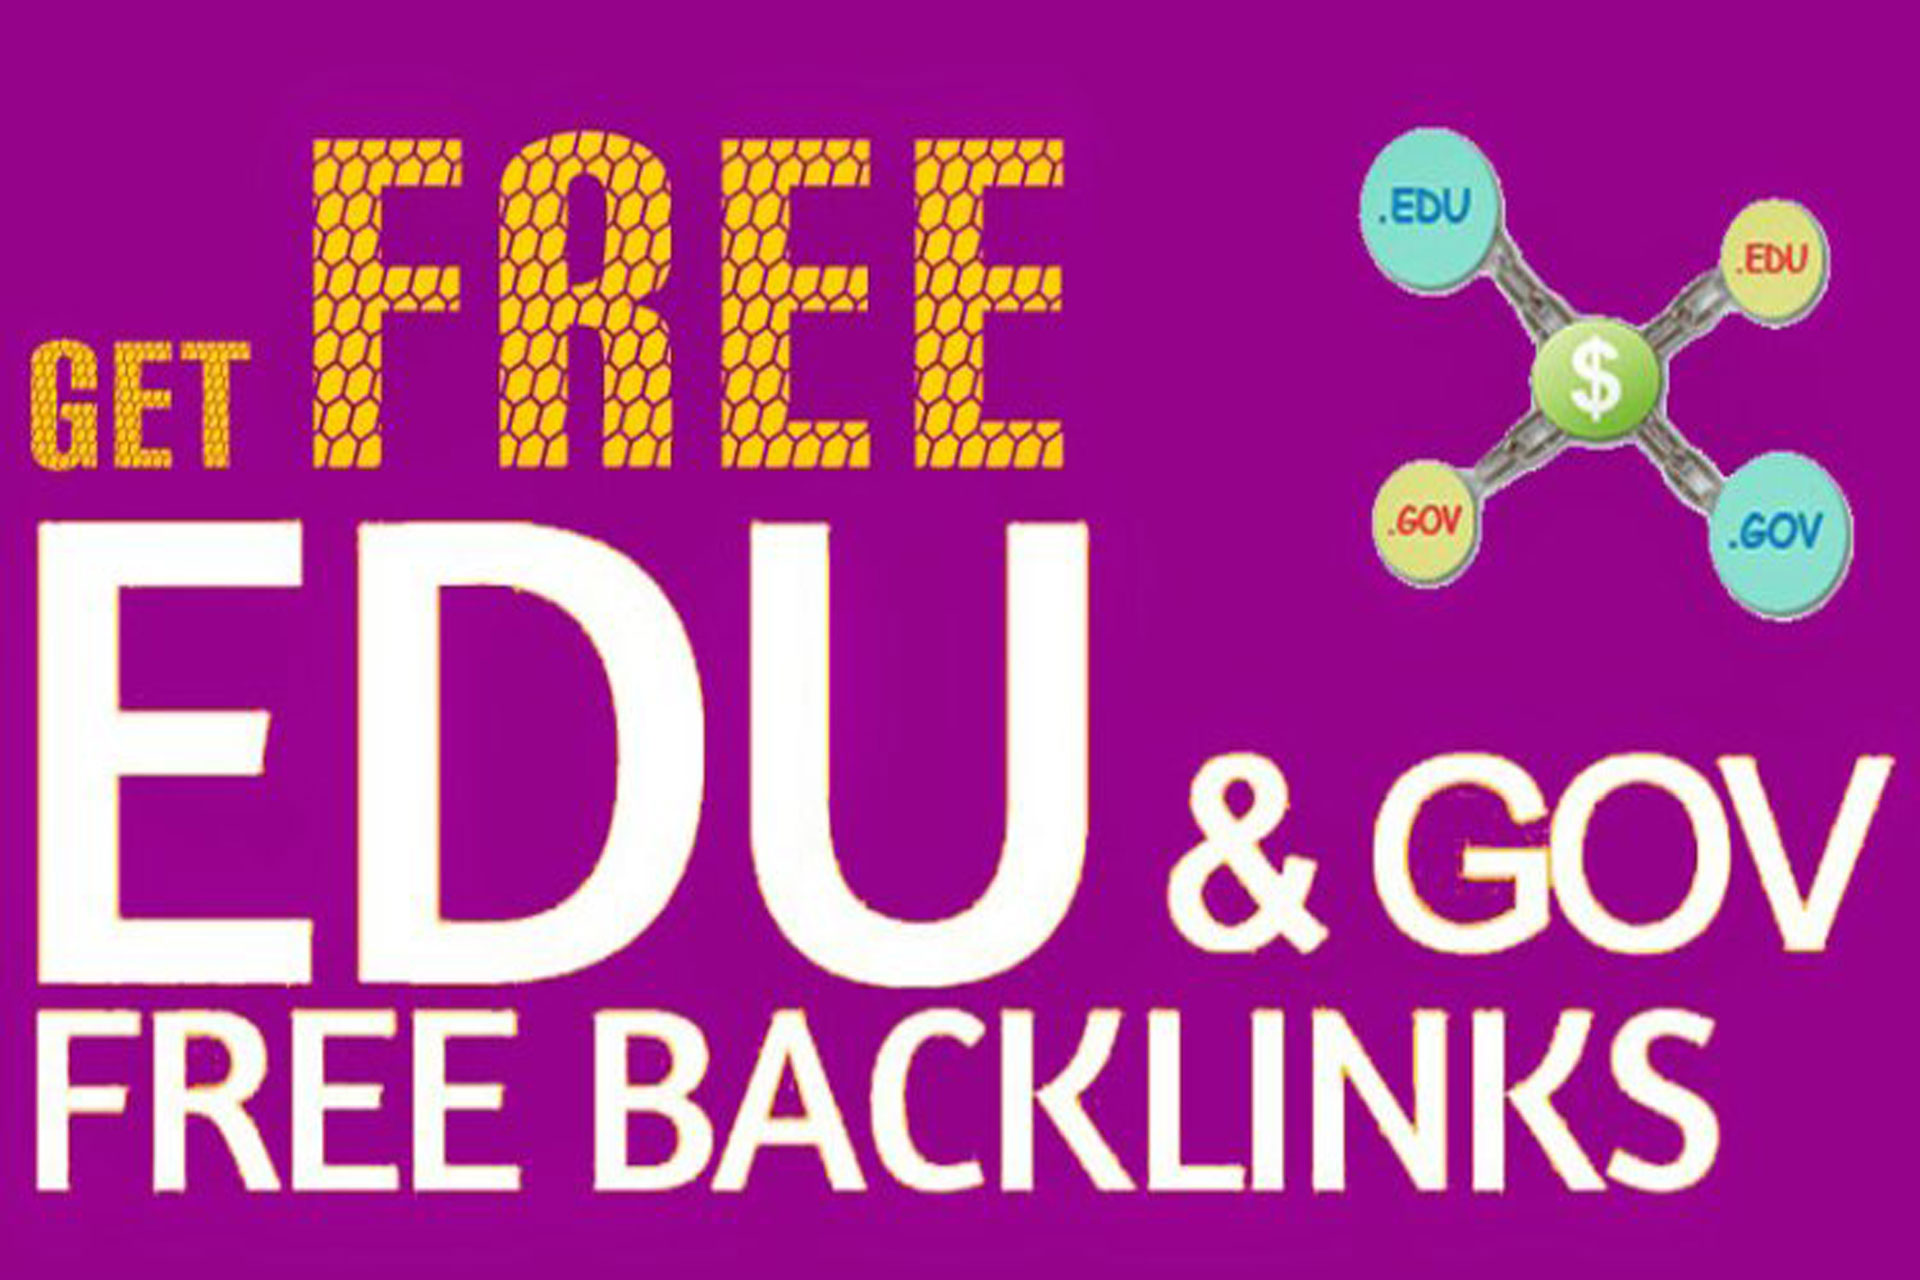 How to get Unlimited .edu and .gov backlinks?